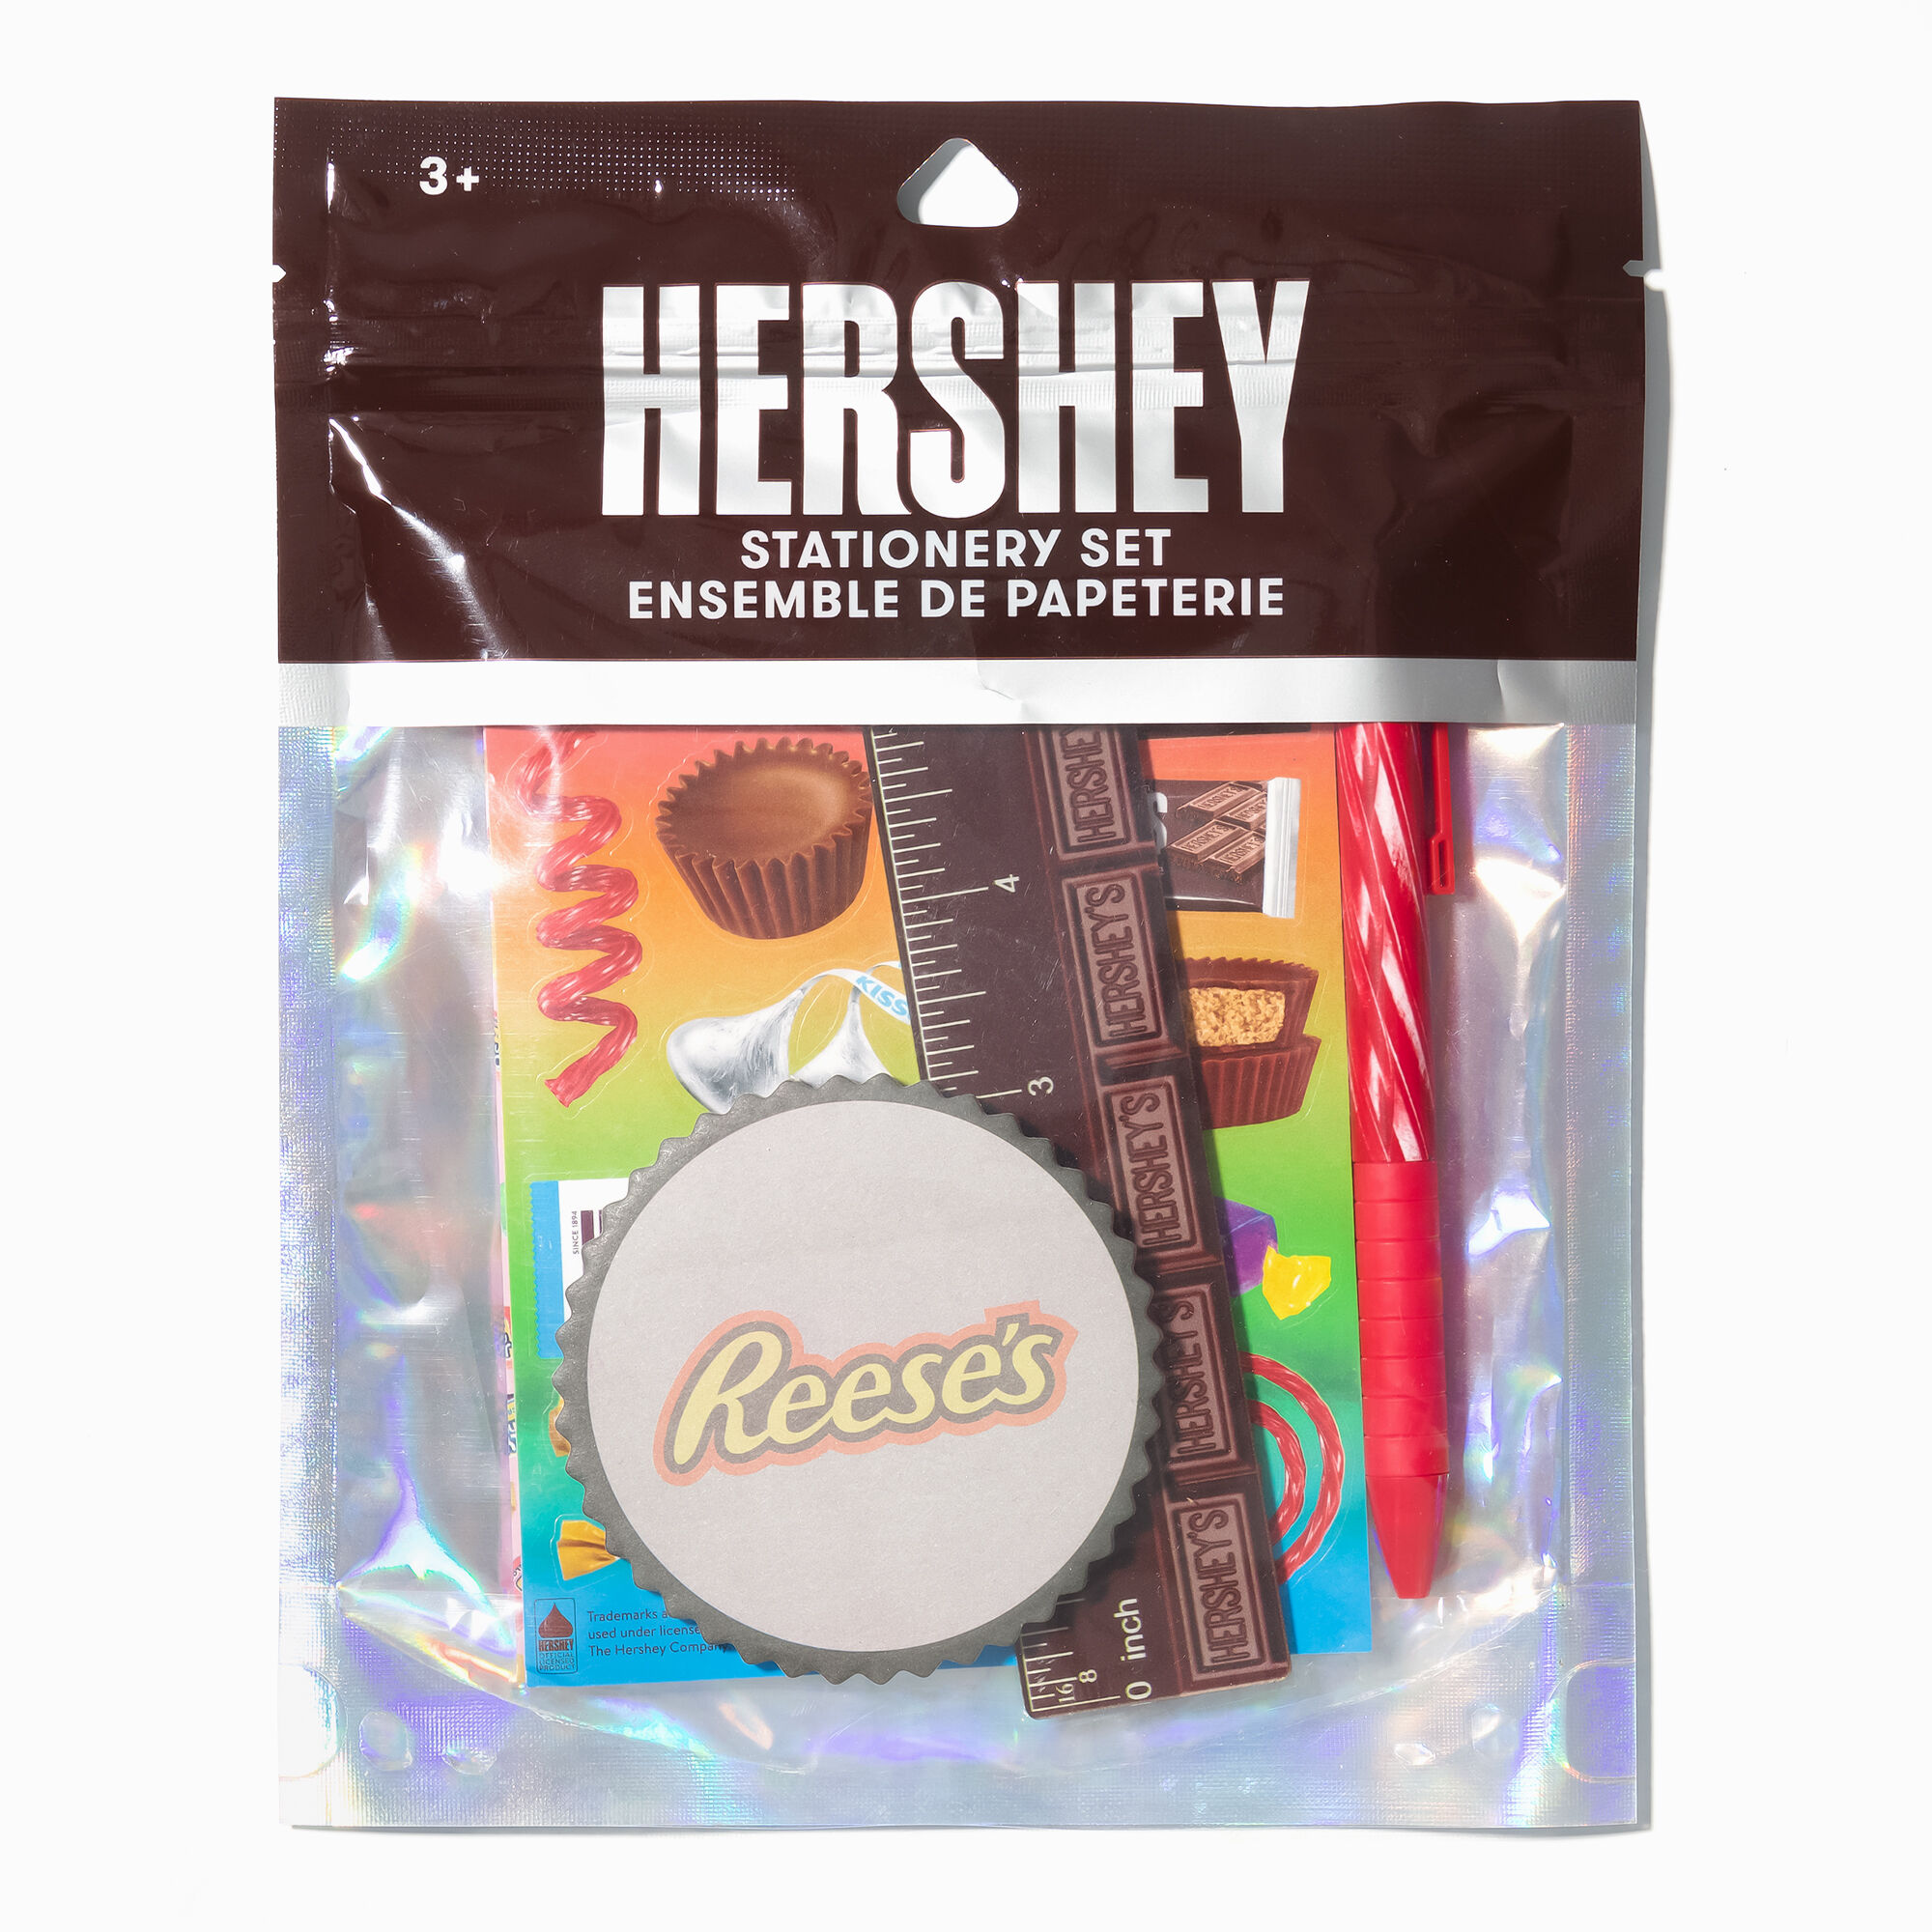 View Claires Hersheys Stationery Set 5 Pack information